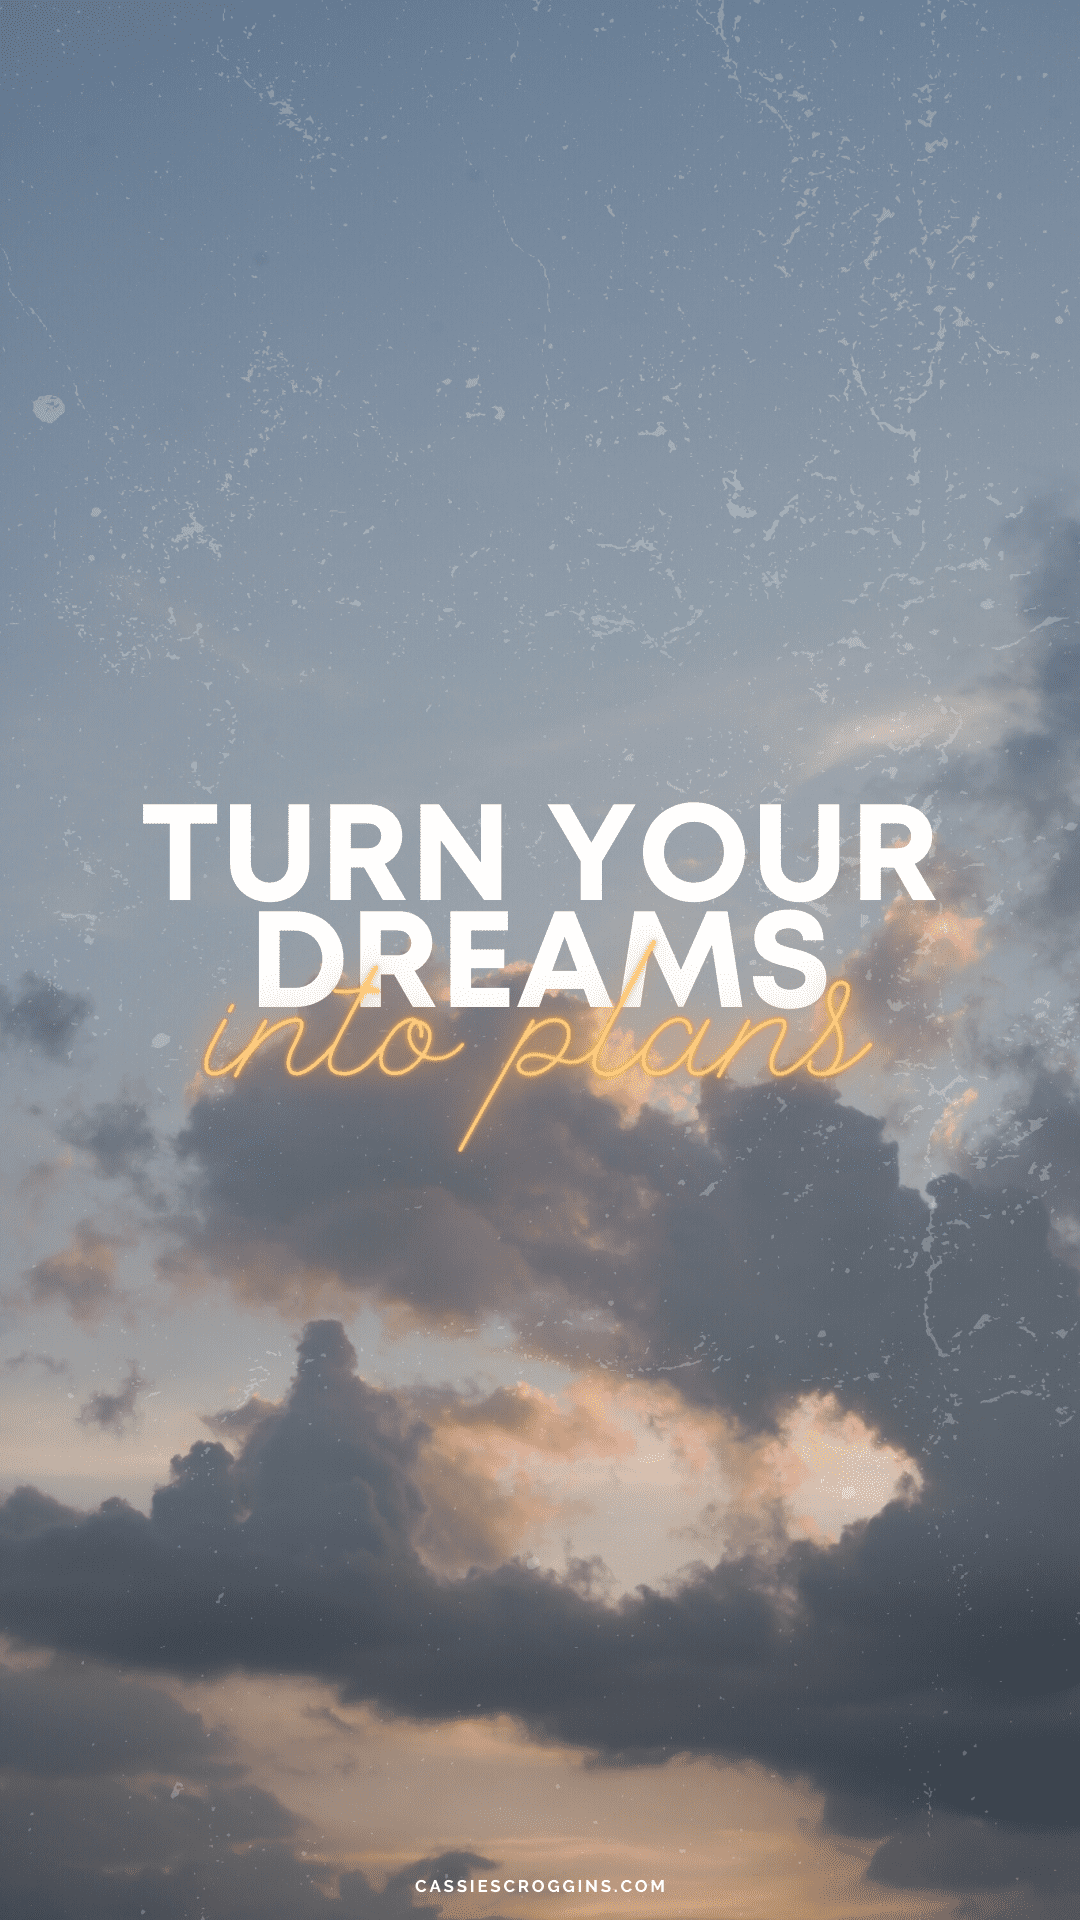 Best Free Motivational iPhone Wallpaper to Keep You Inspired in 2023